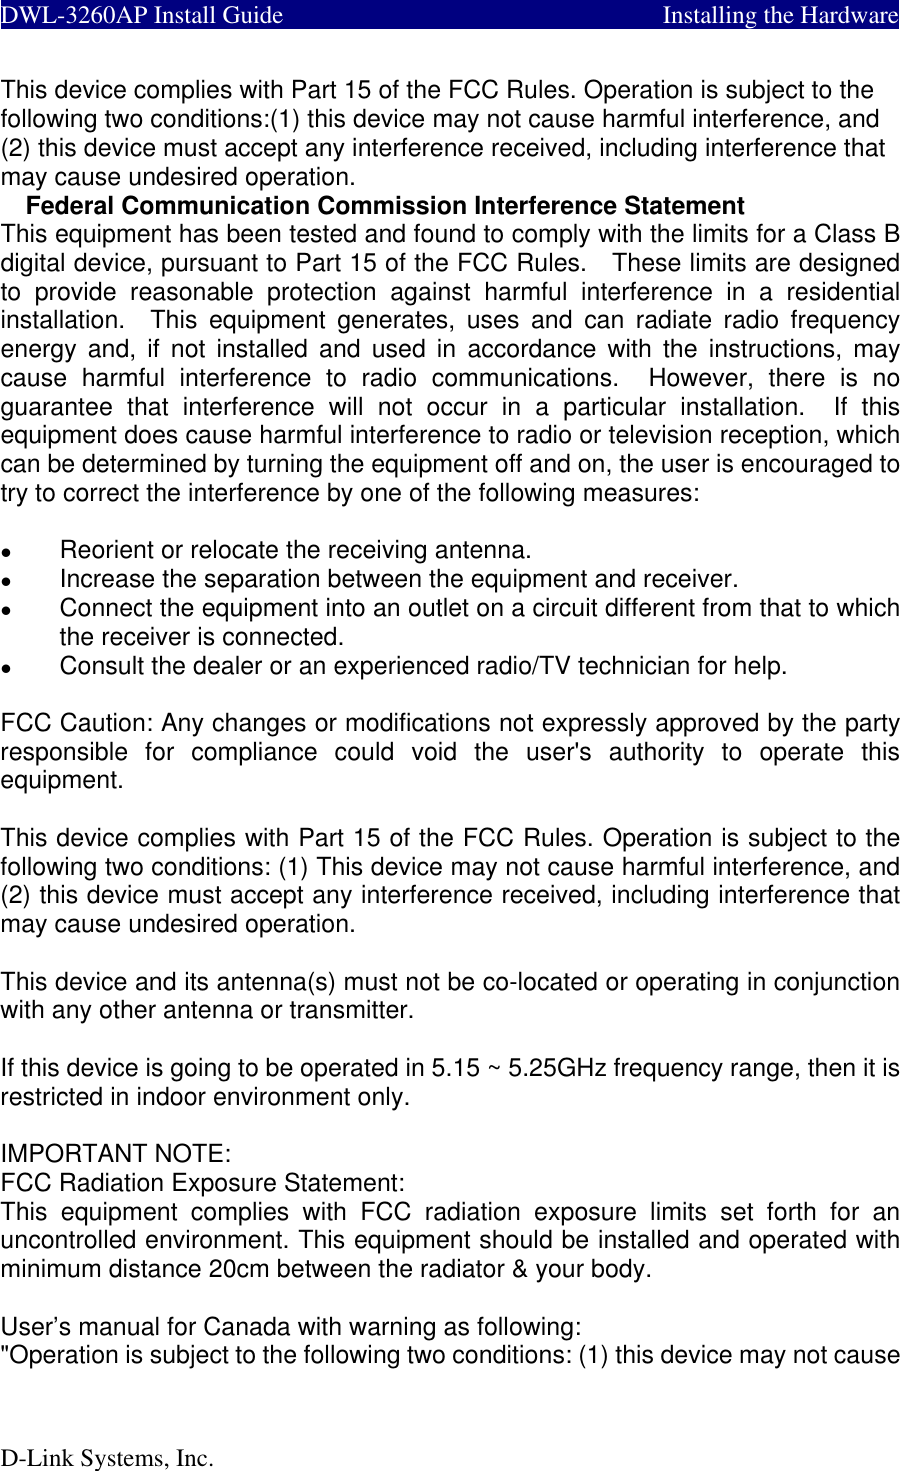  DWL-3260AP Install Guide         Installing the Hardware  This device complies with Part 15 of the FCC Rules. Operation is subject to the following two conditions:(1) this device may not cause harmful interference, and (2) this device must accept any interference received, including interference that may cause undesired operation. Federal Communication Commission Interference Statement This equipment has been tested and found to comply with the limits for a Class B digital device, pursuant to Part 15 of the FCC Rules.    These limits are designed to provide reasonable protection against harmful interference in a residential installation.  This equipment generates, uses and can radiate radio frequency energy and, if not installed and used in accordance with the instructions, may cause harmful interference to radio communications.  However, there is no guarantee that interference will not occur in a particular installation.  If this equipment does cause harmful interference to radio or television reception, which can be determined by turning the equipment off and on, the user is encouraged to try to correct the interference by one of the following measures:    Reorient or relocate the receiving antenna.   Increase the separation between the equipment and receiver.   Connect the equipment into an outlet on a circuit different from that to which the receiver is connected.   Consult the dealer or an experienced radio/TV technician for help.  FCC Caution: Any changes or modifications not expressly approved by the party responsible for compliance could void the user&apos;s authority to operate this equipment.  This device complies with Part 15 of the FCC Rules. Operation is subject to the following two conditions: (1) This device may not cause harmful interference, and (2) this device must accept any interference received, including interference that may cause undesired operation.  This device and its antenna(s) must not be co-located or operating in conjunction with any other antenna or transmitter.  If this device is going to be operated in 5.15 ~ 5.25GHz frequency range, then it is restricted in indoor environment only.  IMPORTANT NOTE: FCC Radiation Exposure Statement: This equipment complies with FCC radiation exposure limits set forth for an uncontrolled environment. This equipment should be installed and operated with minimum distance 20cm between the radiator &amp; your body.  User’s manual for Canada with warning as following: &quot;Operation is subject to the following two conditions: (1) this device may not cause D-Link Systems, Inc. 